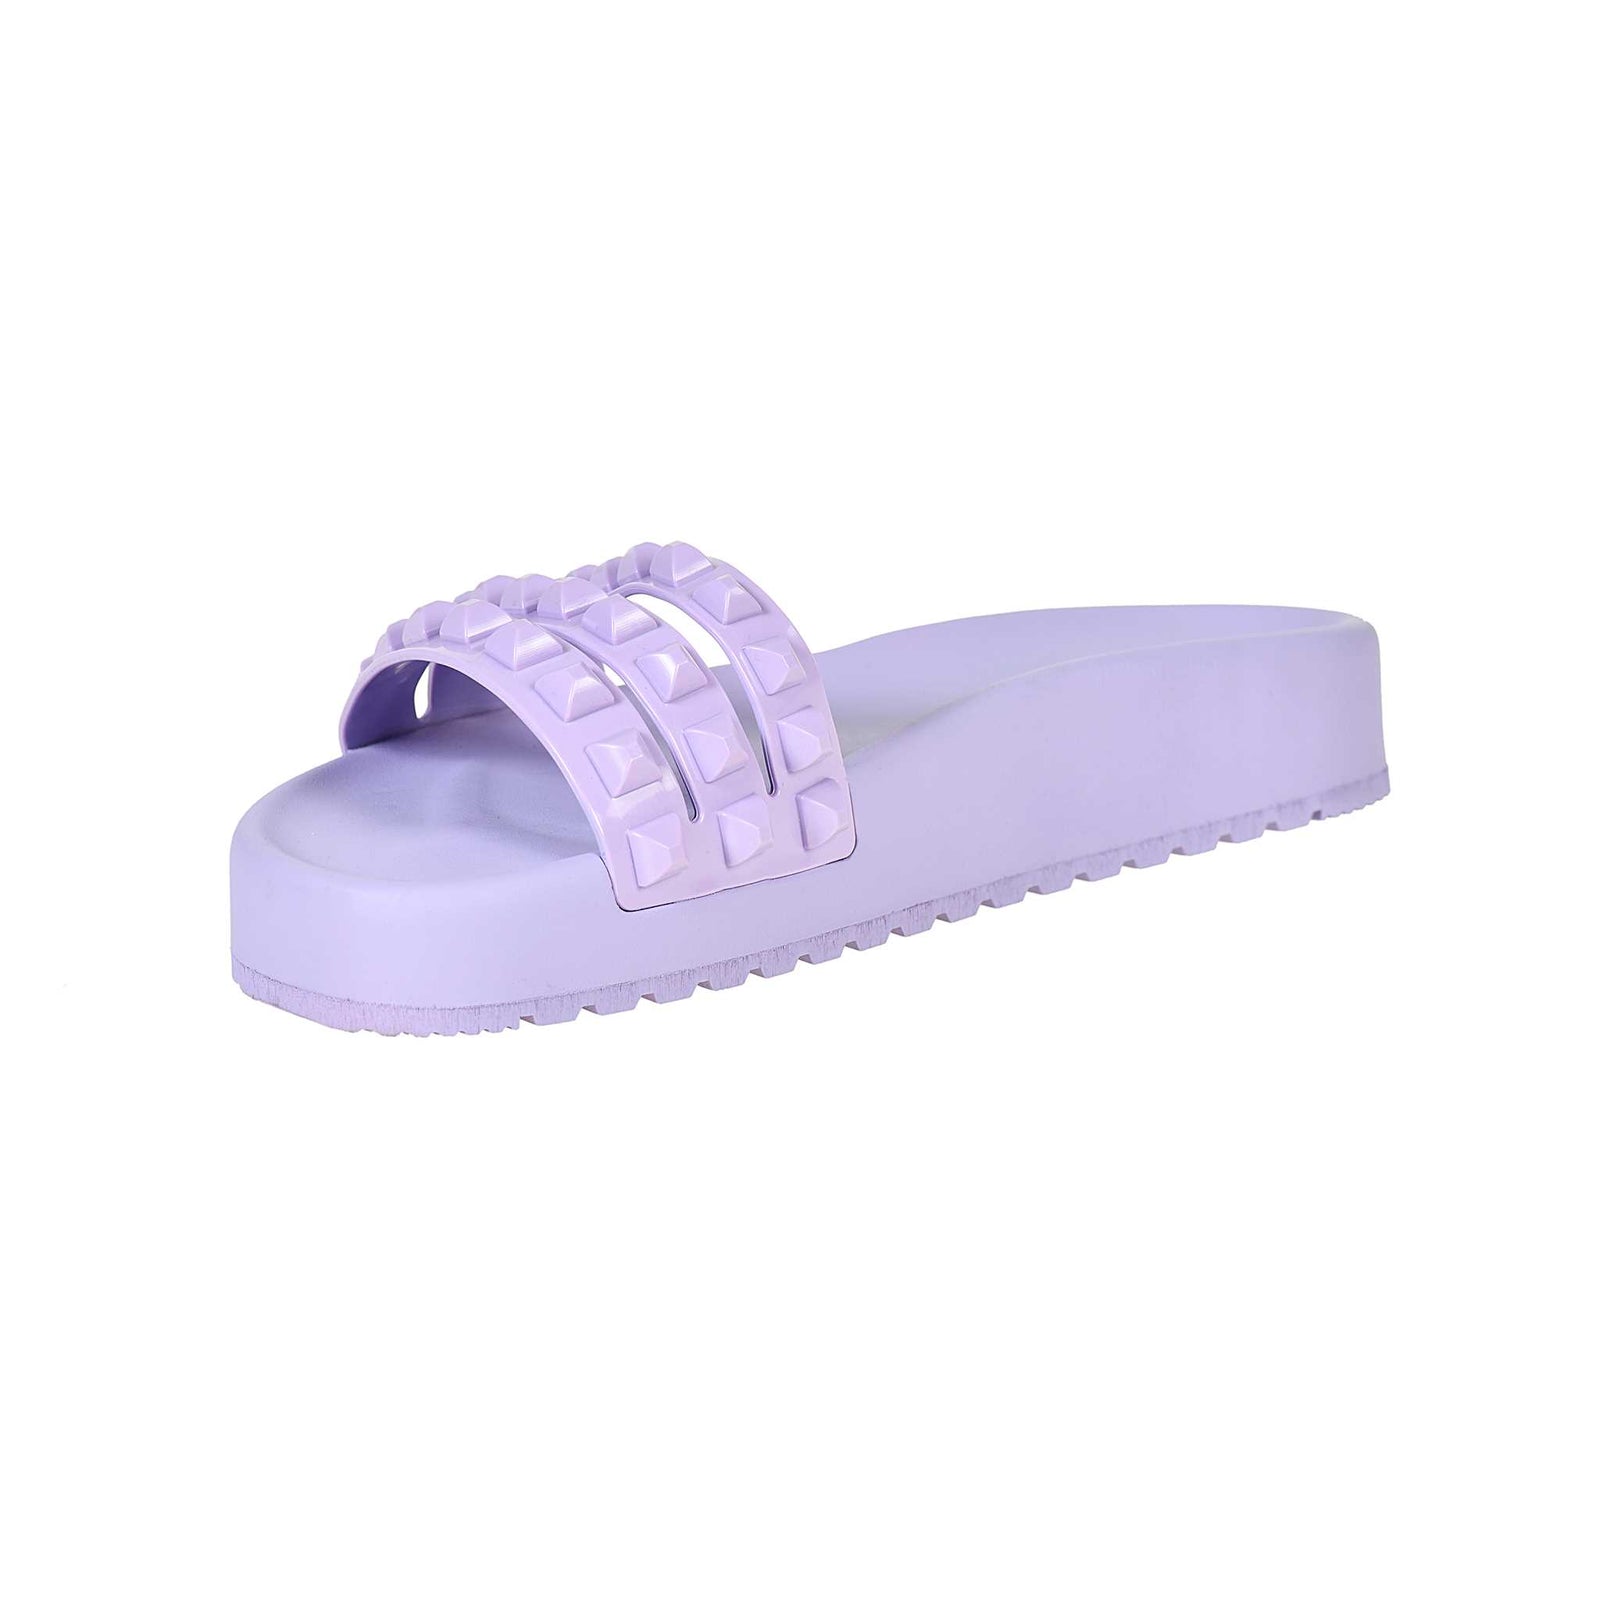 Carmen Sol 3 straps jelly slides in color violet perfect for the beach